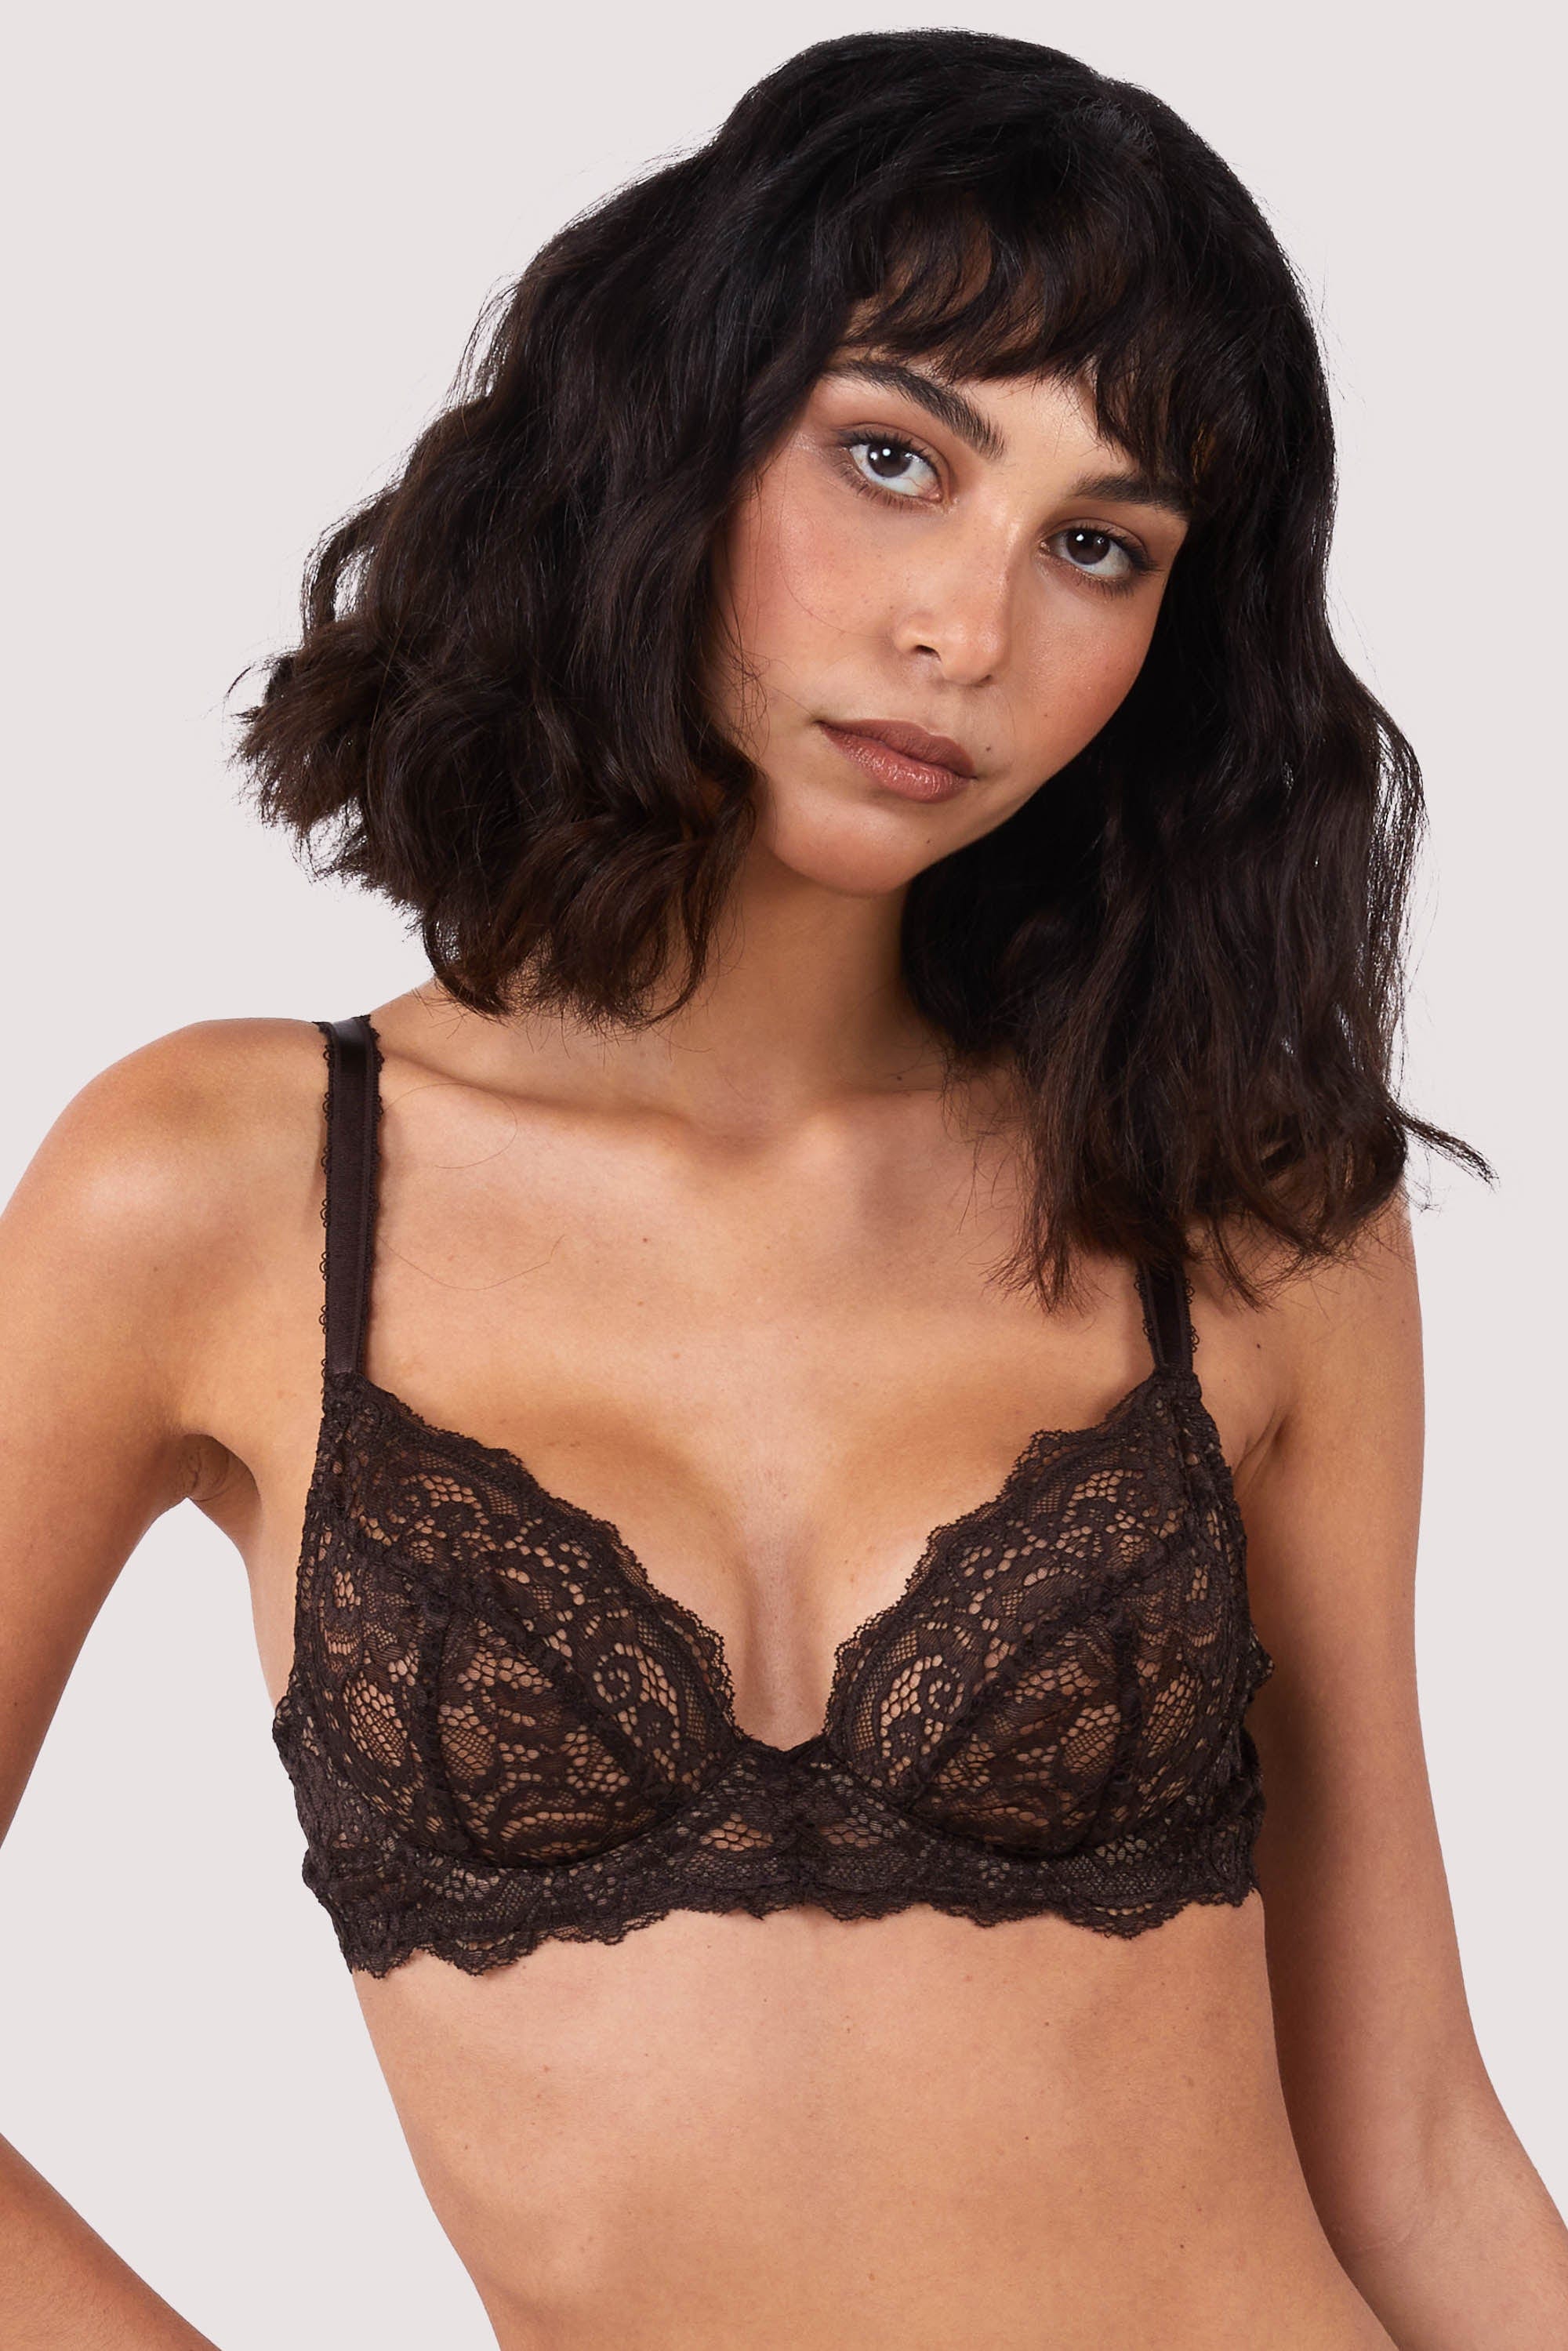 Fayreform Classic Underwire Bra - Latte – Big Girls Don't Cry (Anymore)